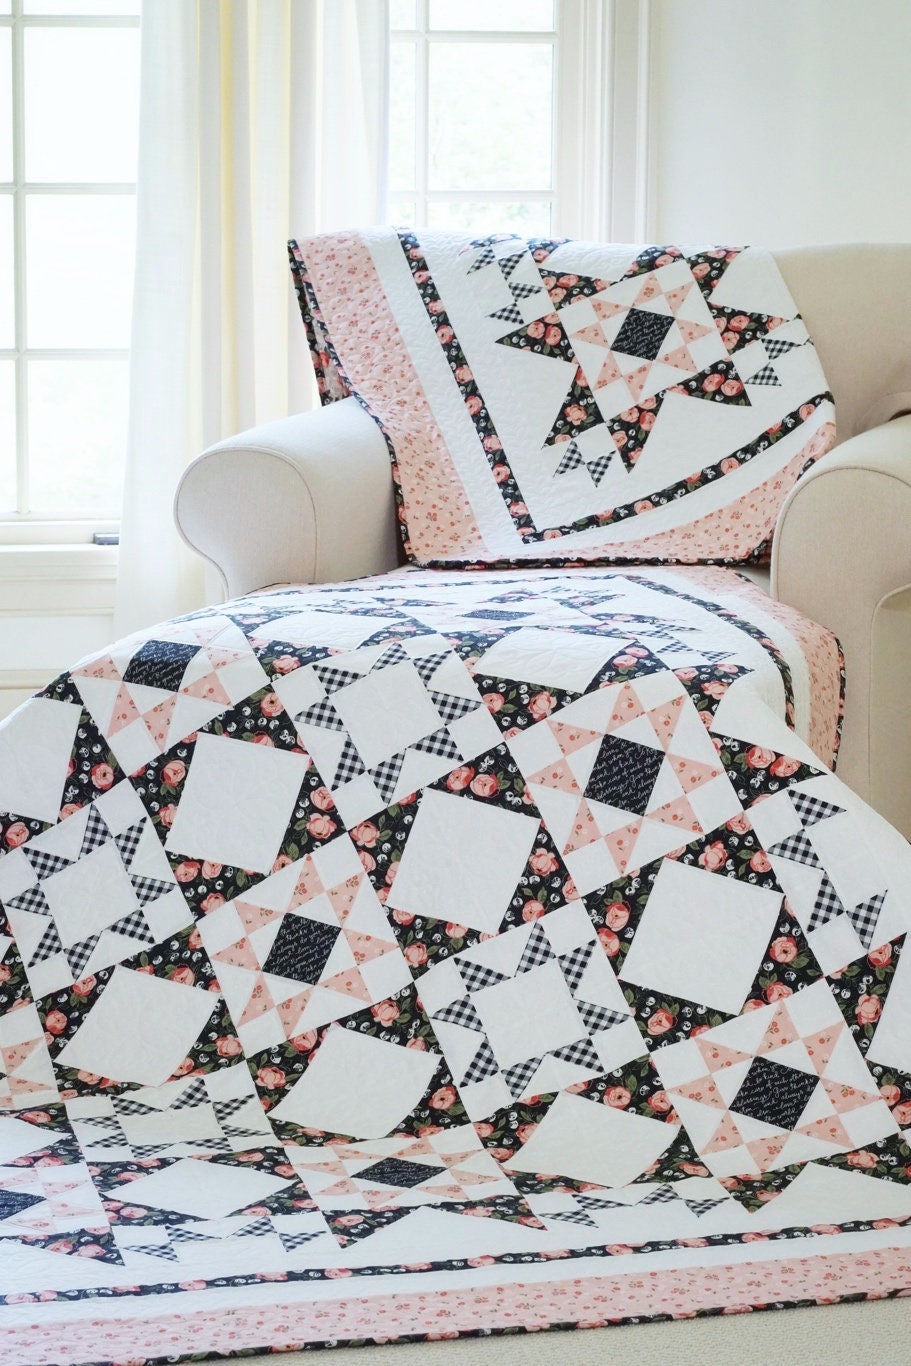 Rebecca Grace Quilting: And the Quilt Goes On Tips for